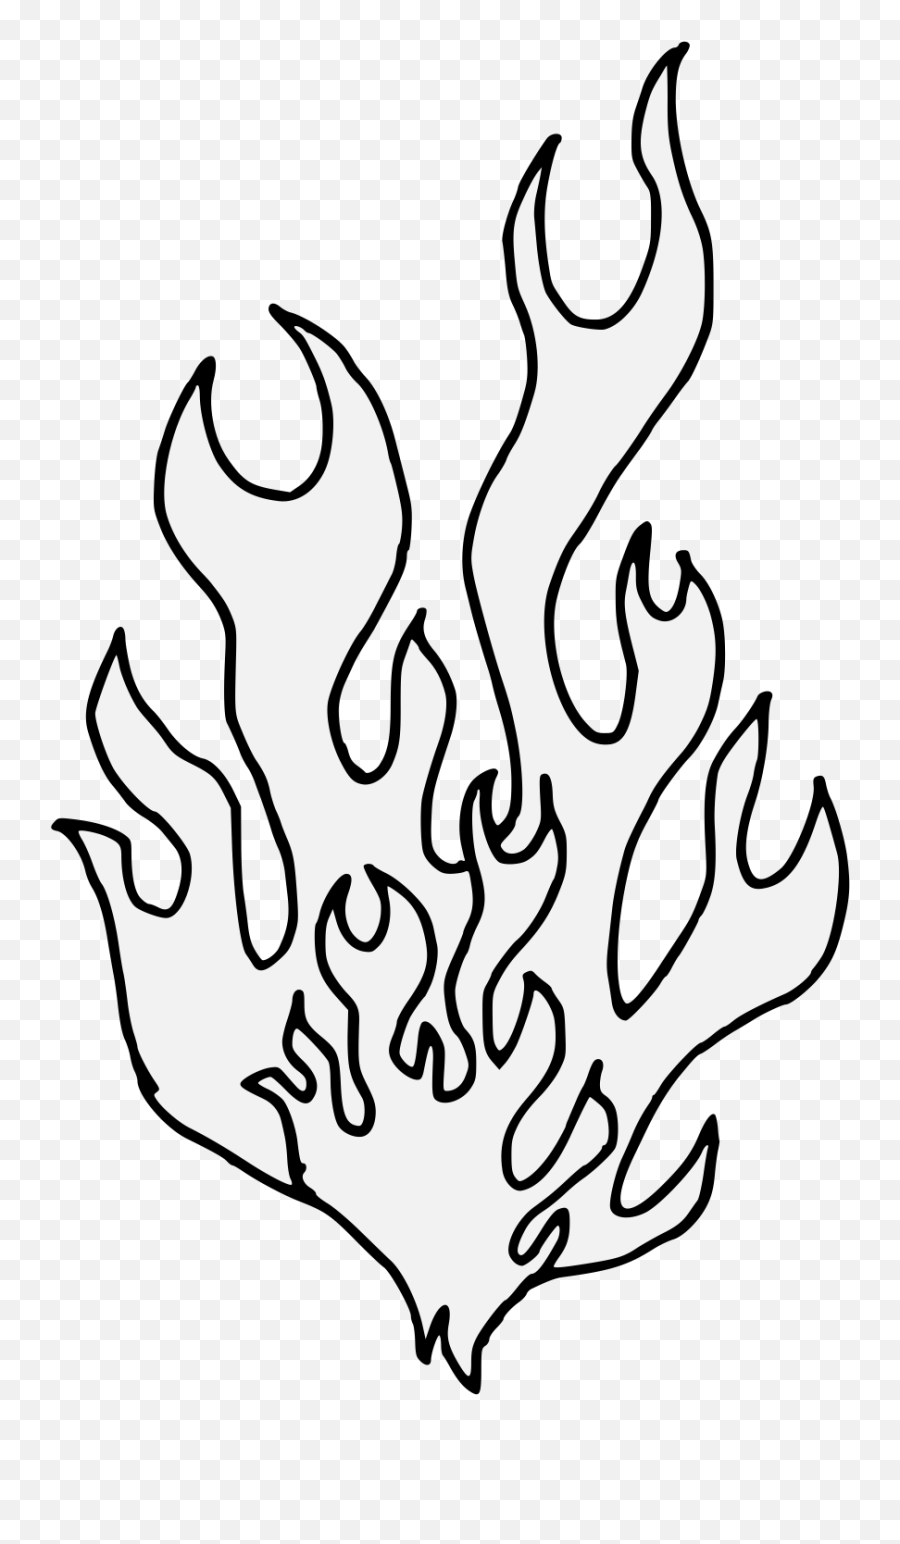 Animated Realistic Fire With Smoke On Transparent Background - Outline Flames Clipart Emoji,Fire Gif Transparent